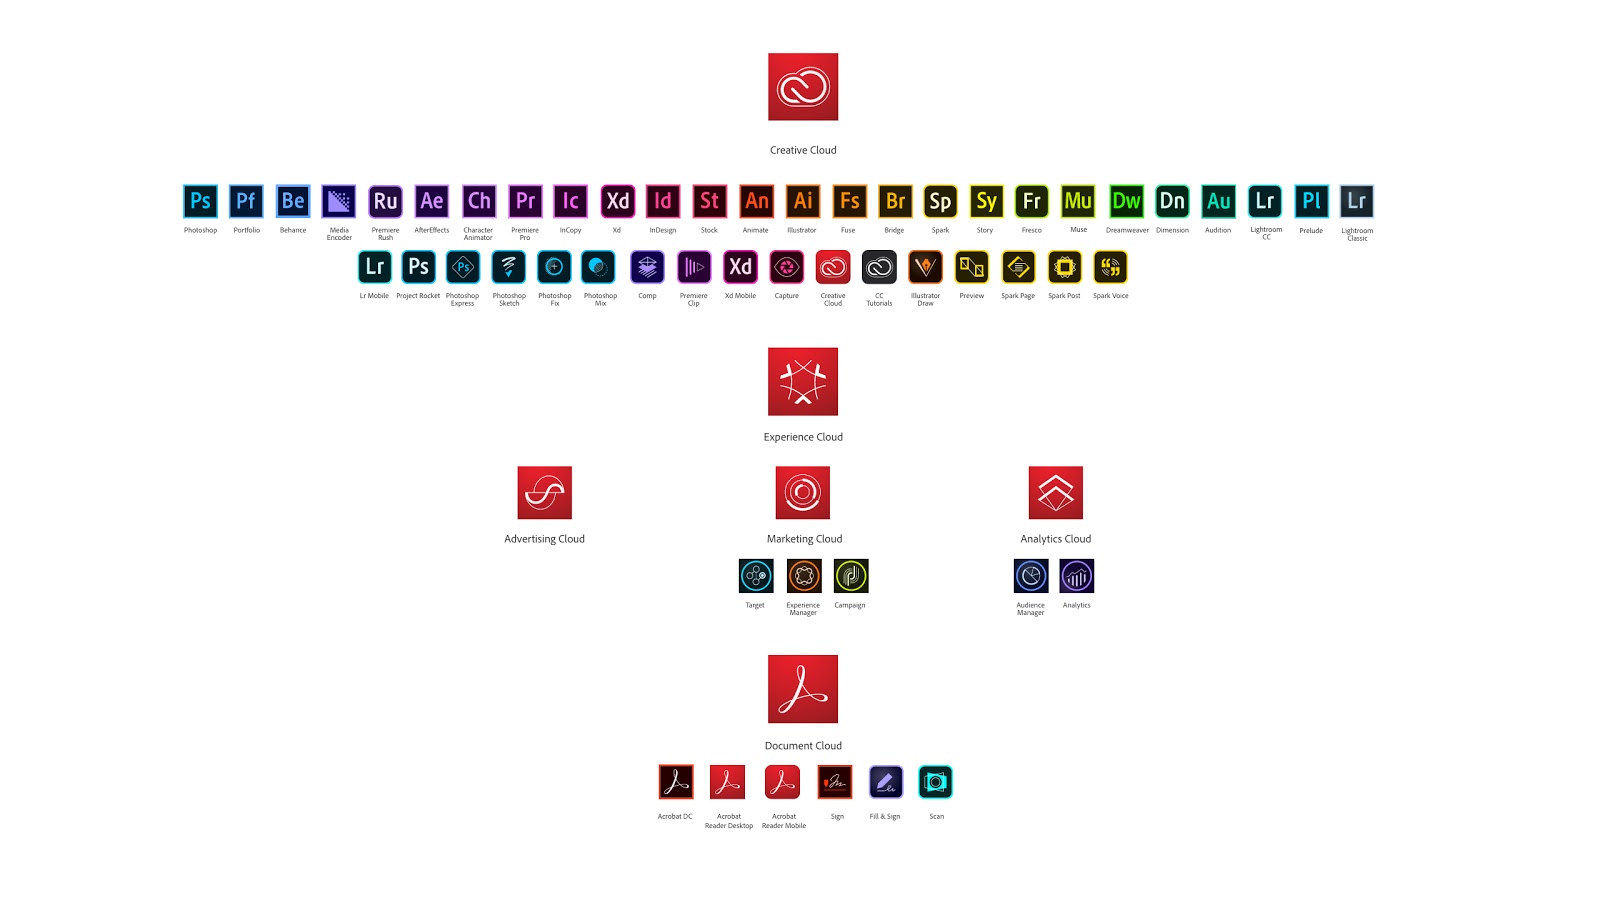 A visual hierarchy of the various brands and applications available in the Adobe ecosystem.